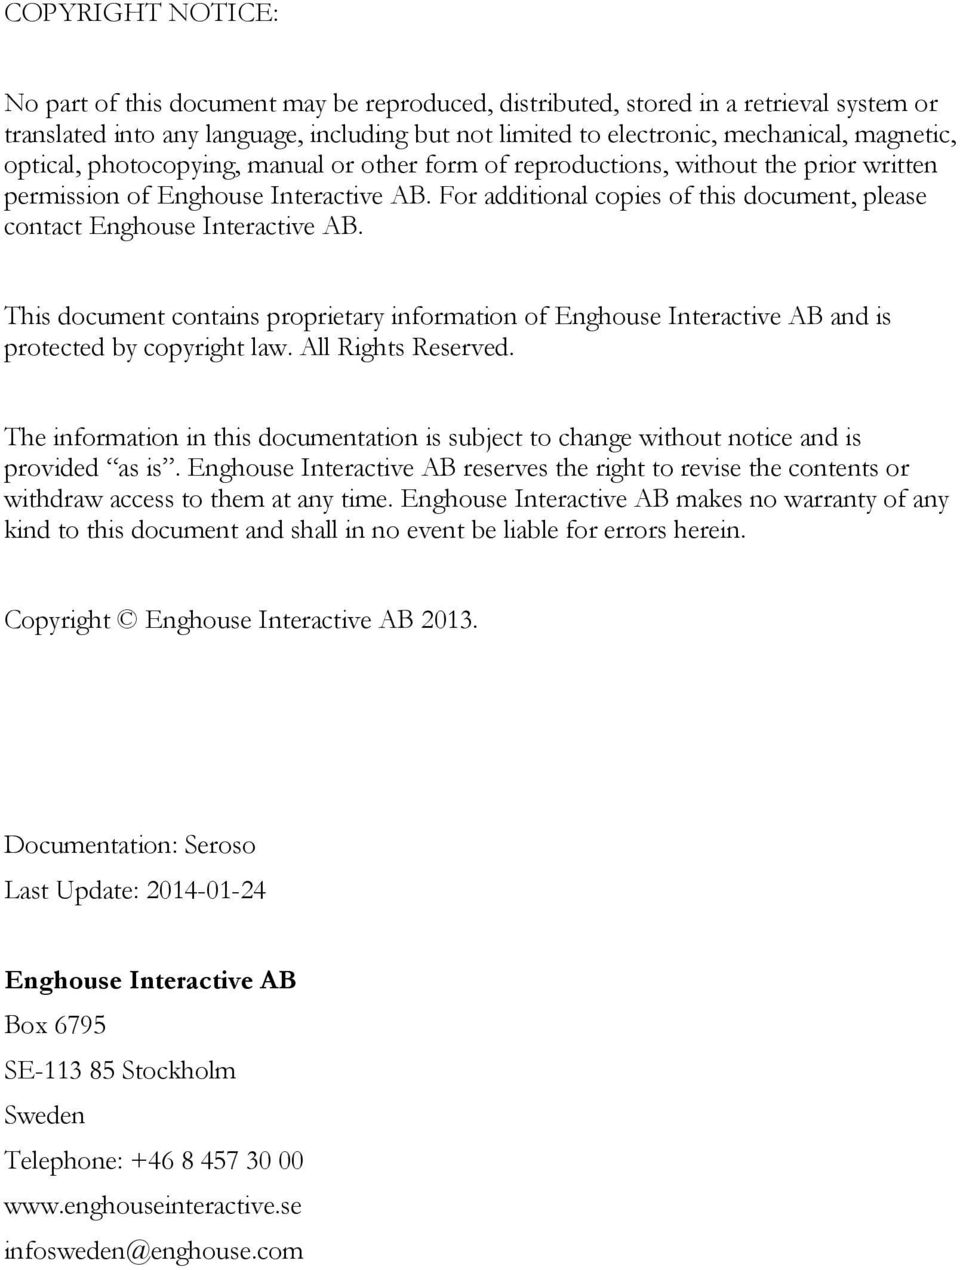 For additional copies of this document, please contact Enghouse Interactive AB. This document contains proprietary information of Enghouse Interactive AB and is protected by copyright law.